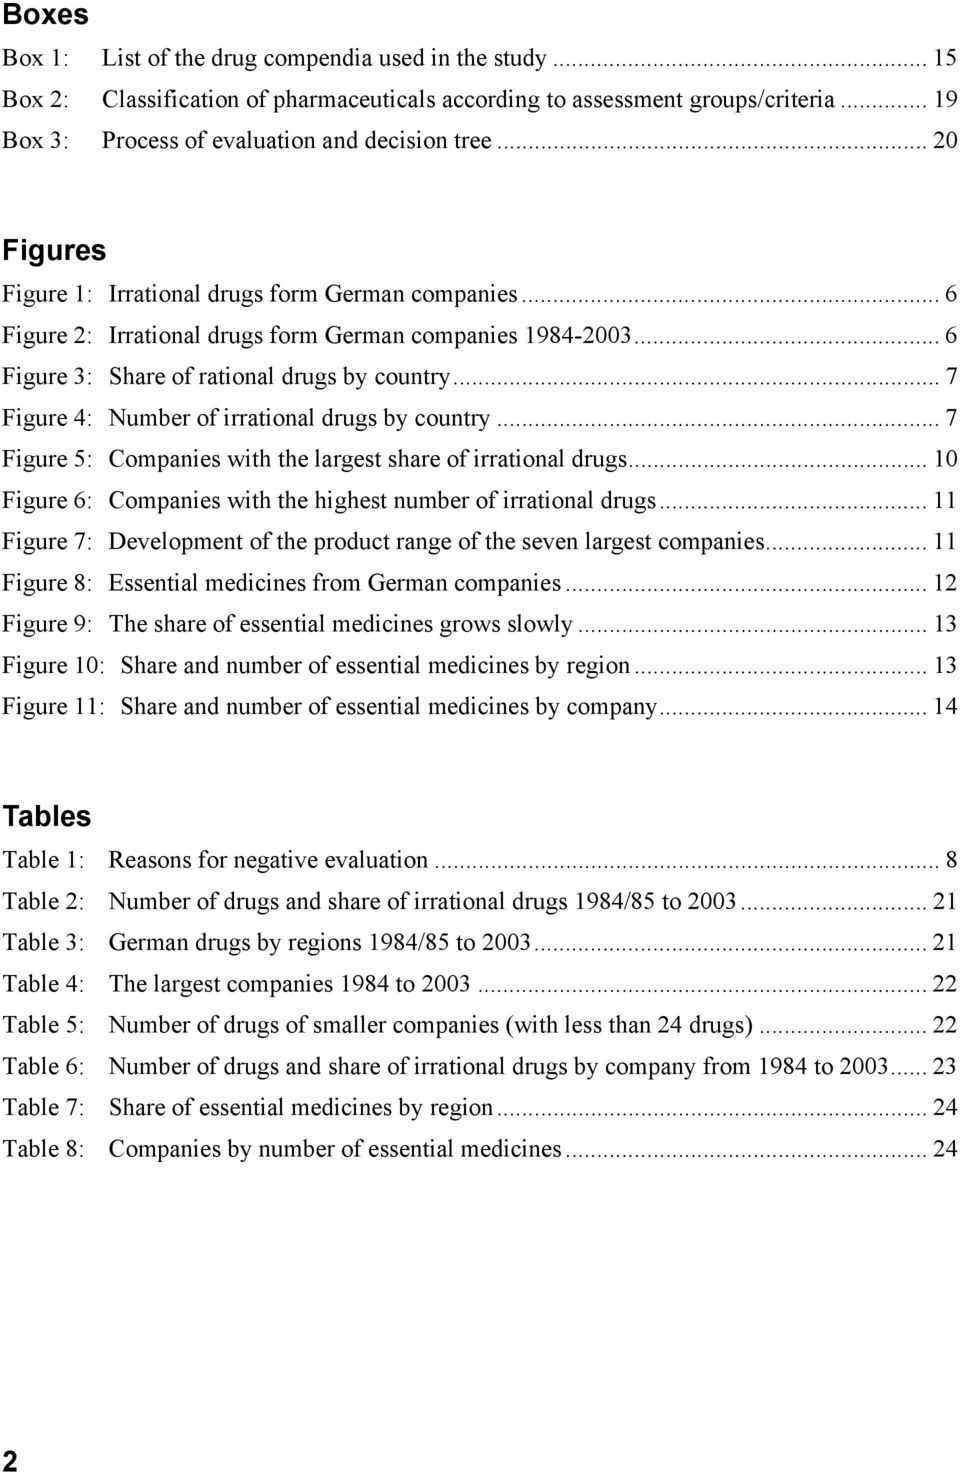 .. 7 Figure 4: Number of irrational drugs by country... 7 Figure 5: Companies with the largest share of irrational drugs... 10 Figure 6: Companies with the highest number of irrational drugs.